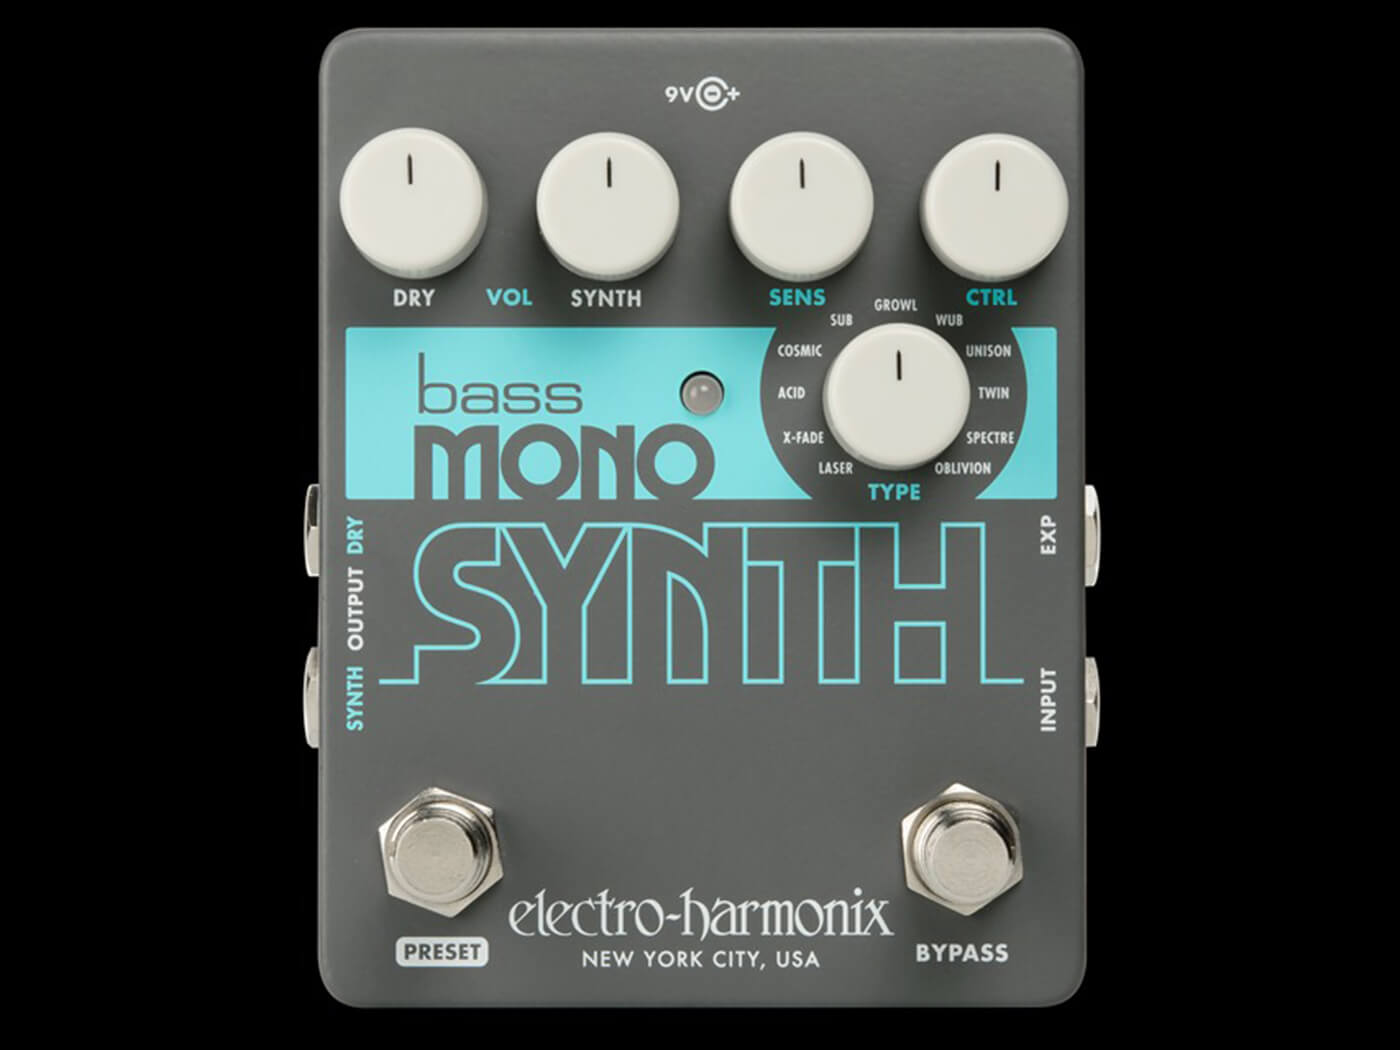 The EHX Bass Mono Synth